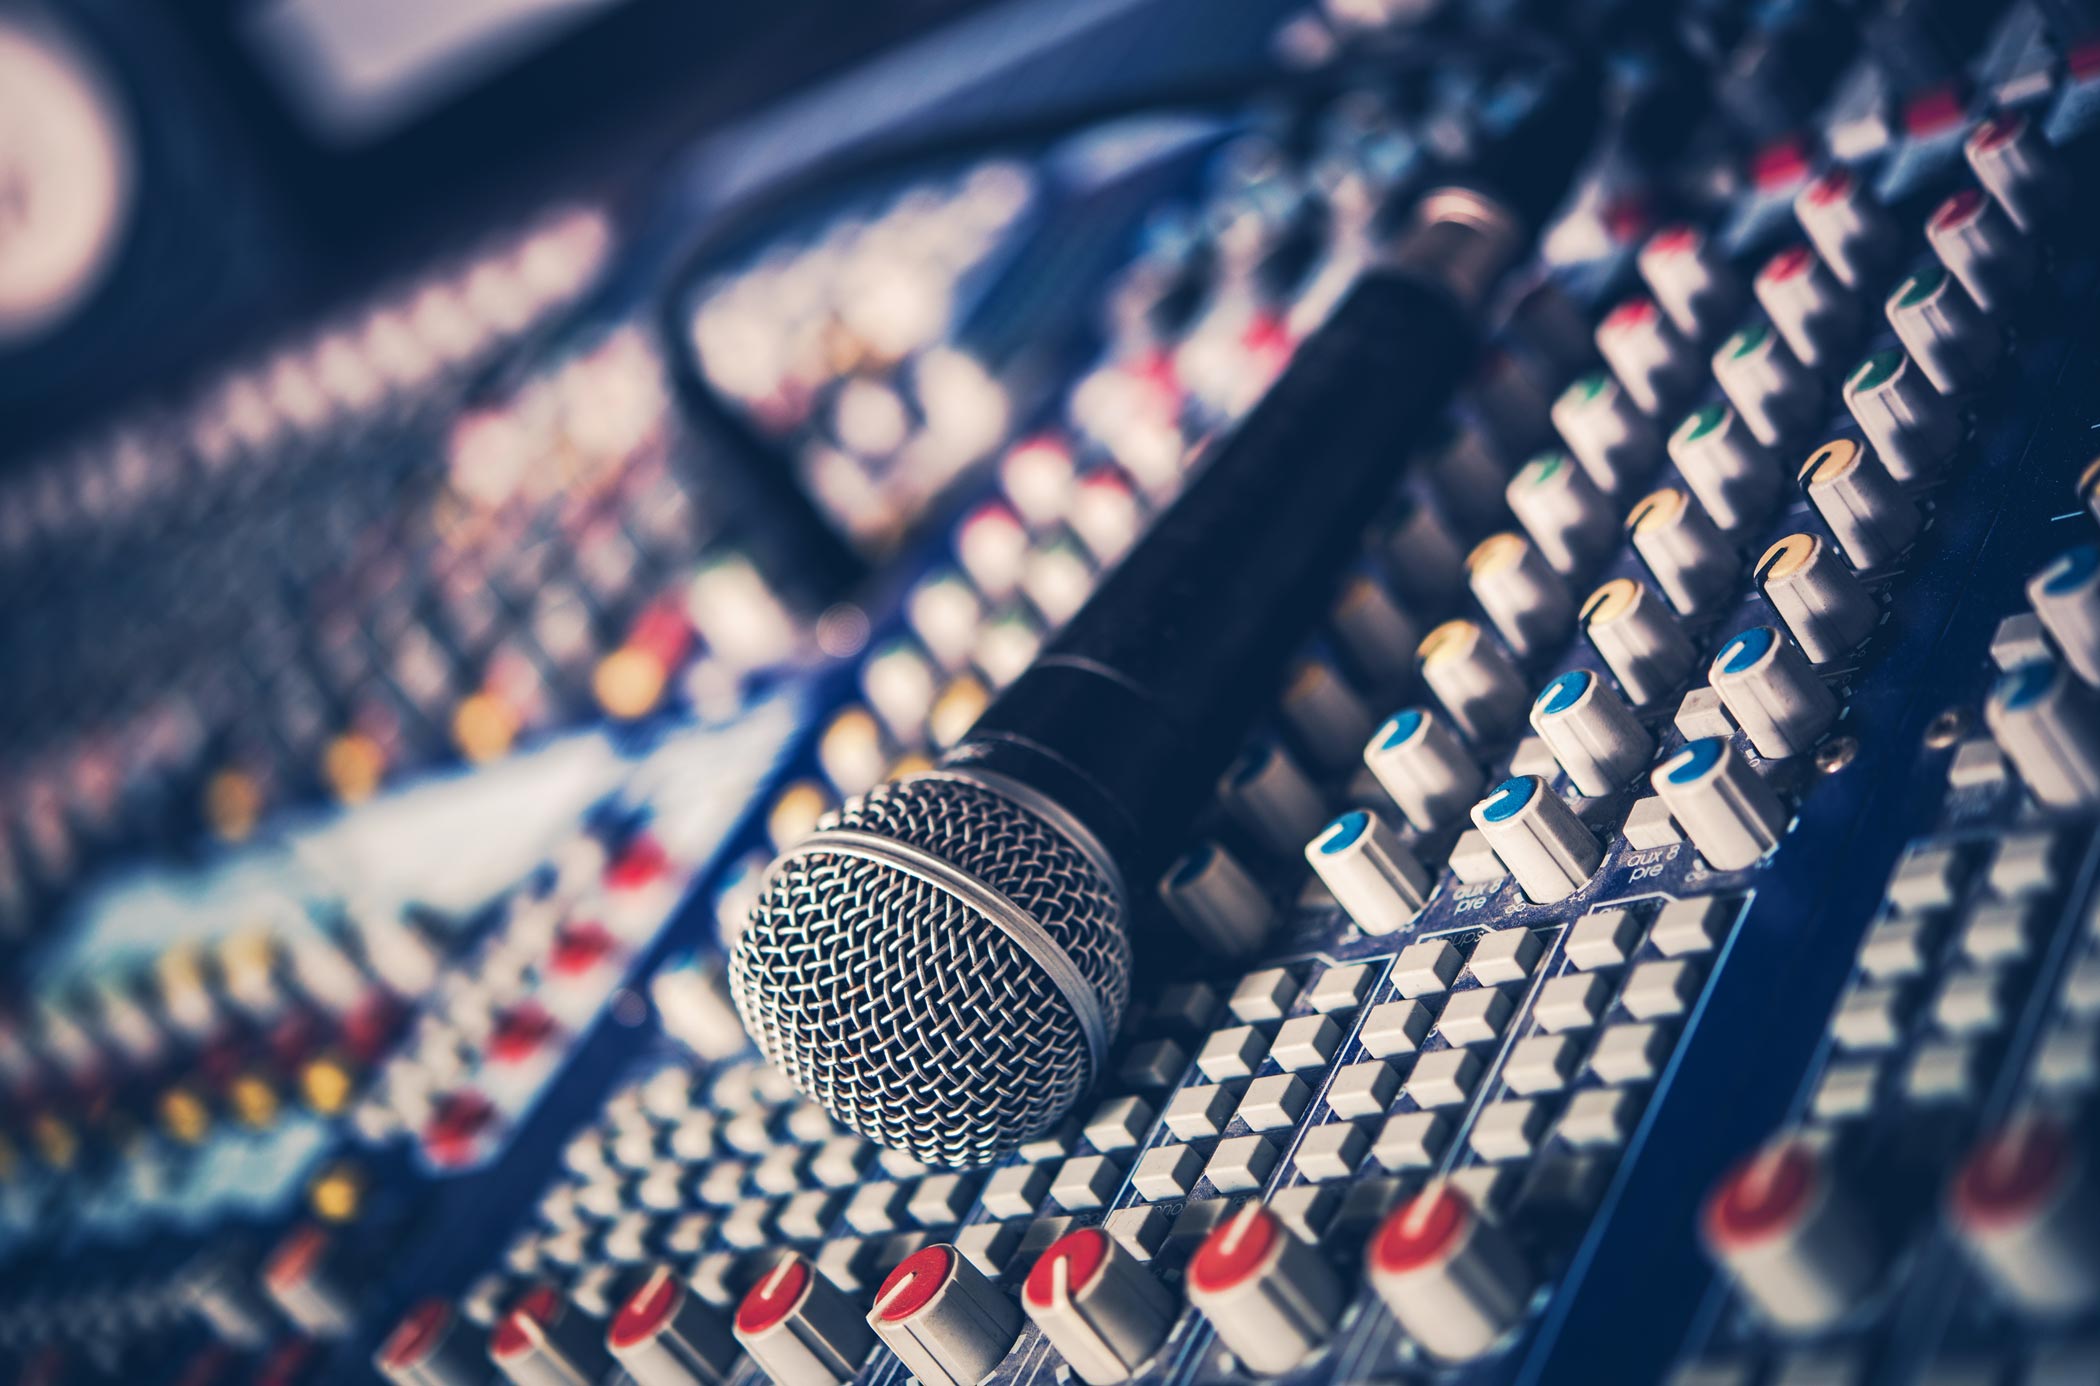 Music mixing desk with a microphone resting on the mixer